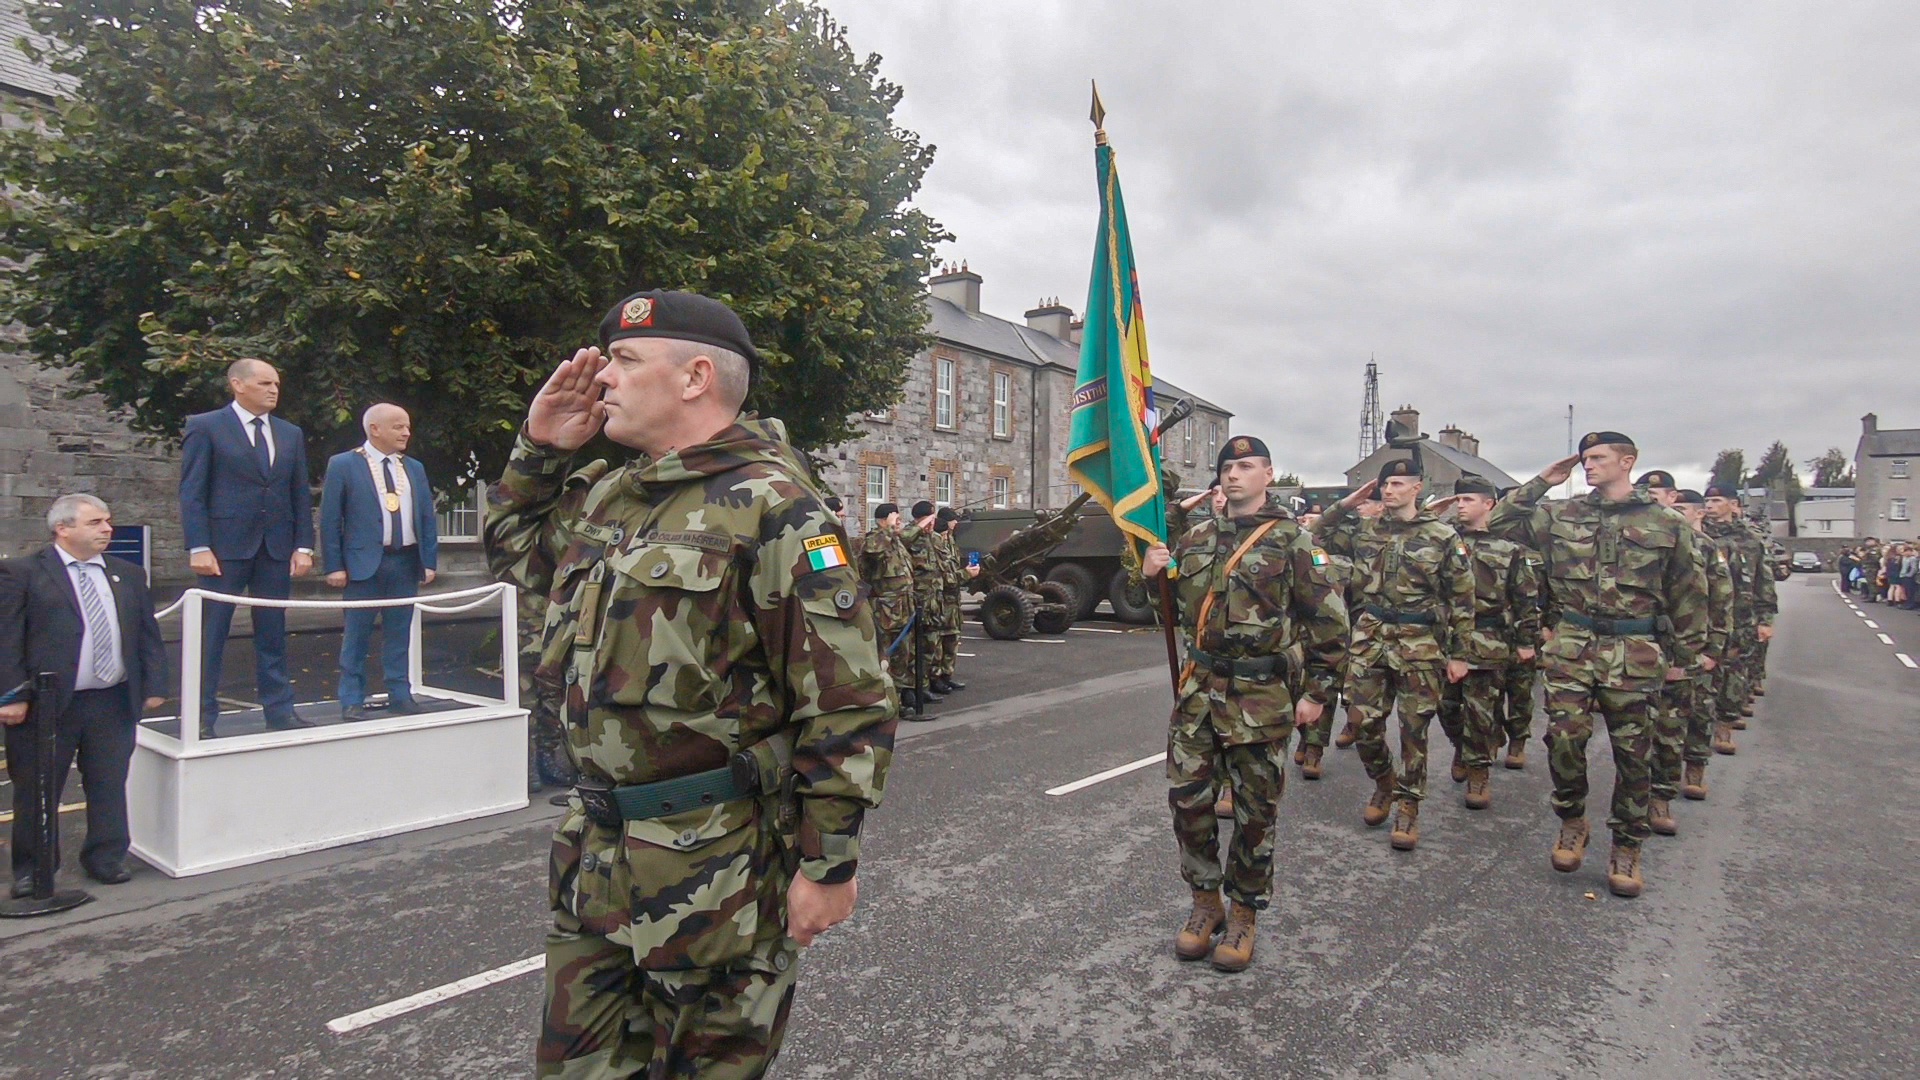 Minister Paul Kehoe Reviews Irish Troops heading for service with UNDOF